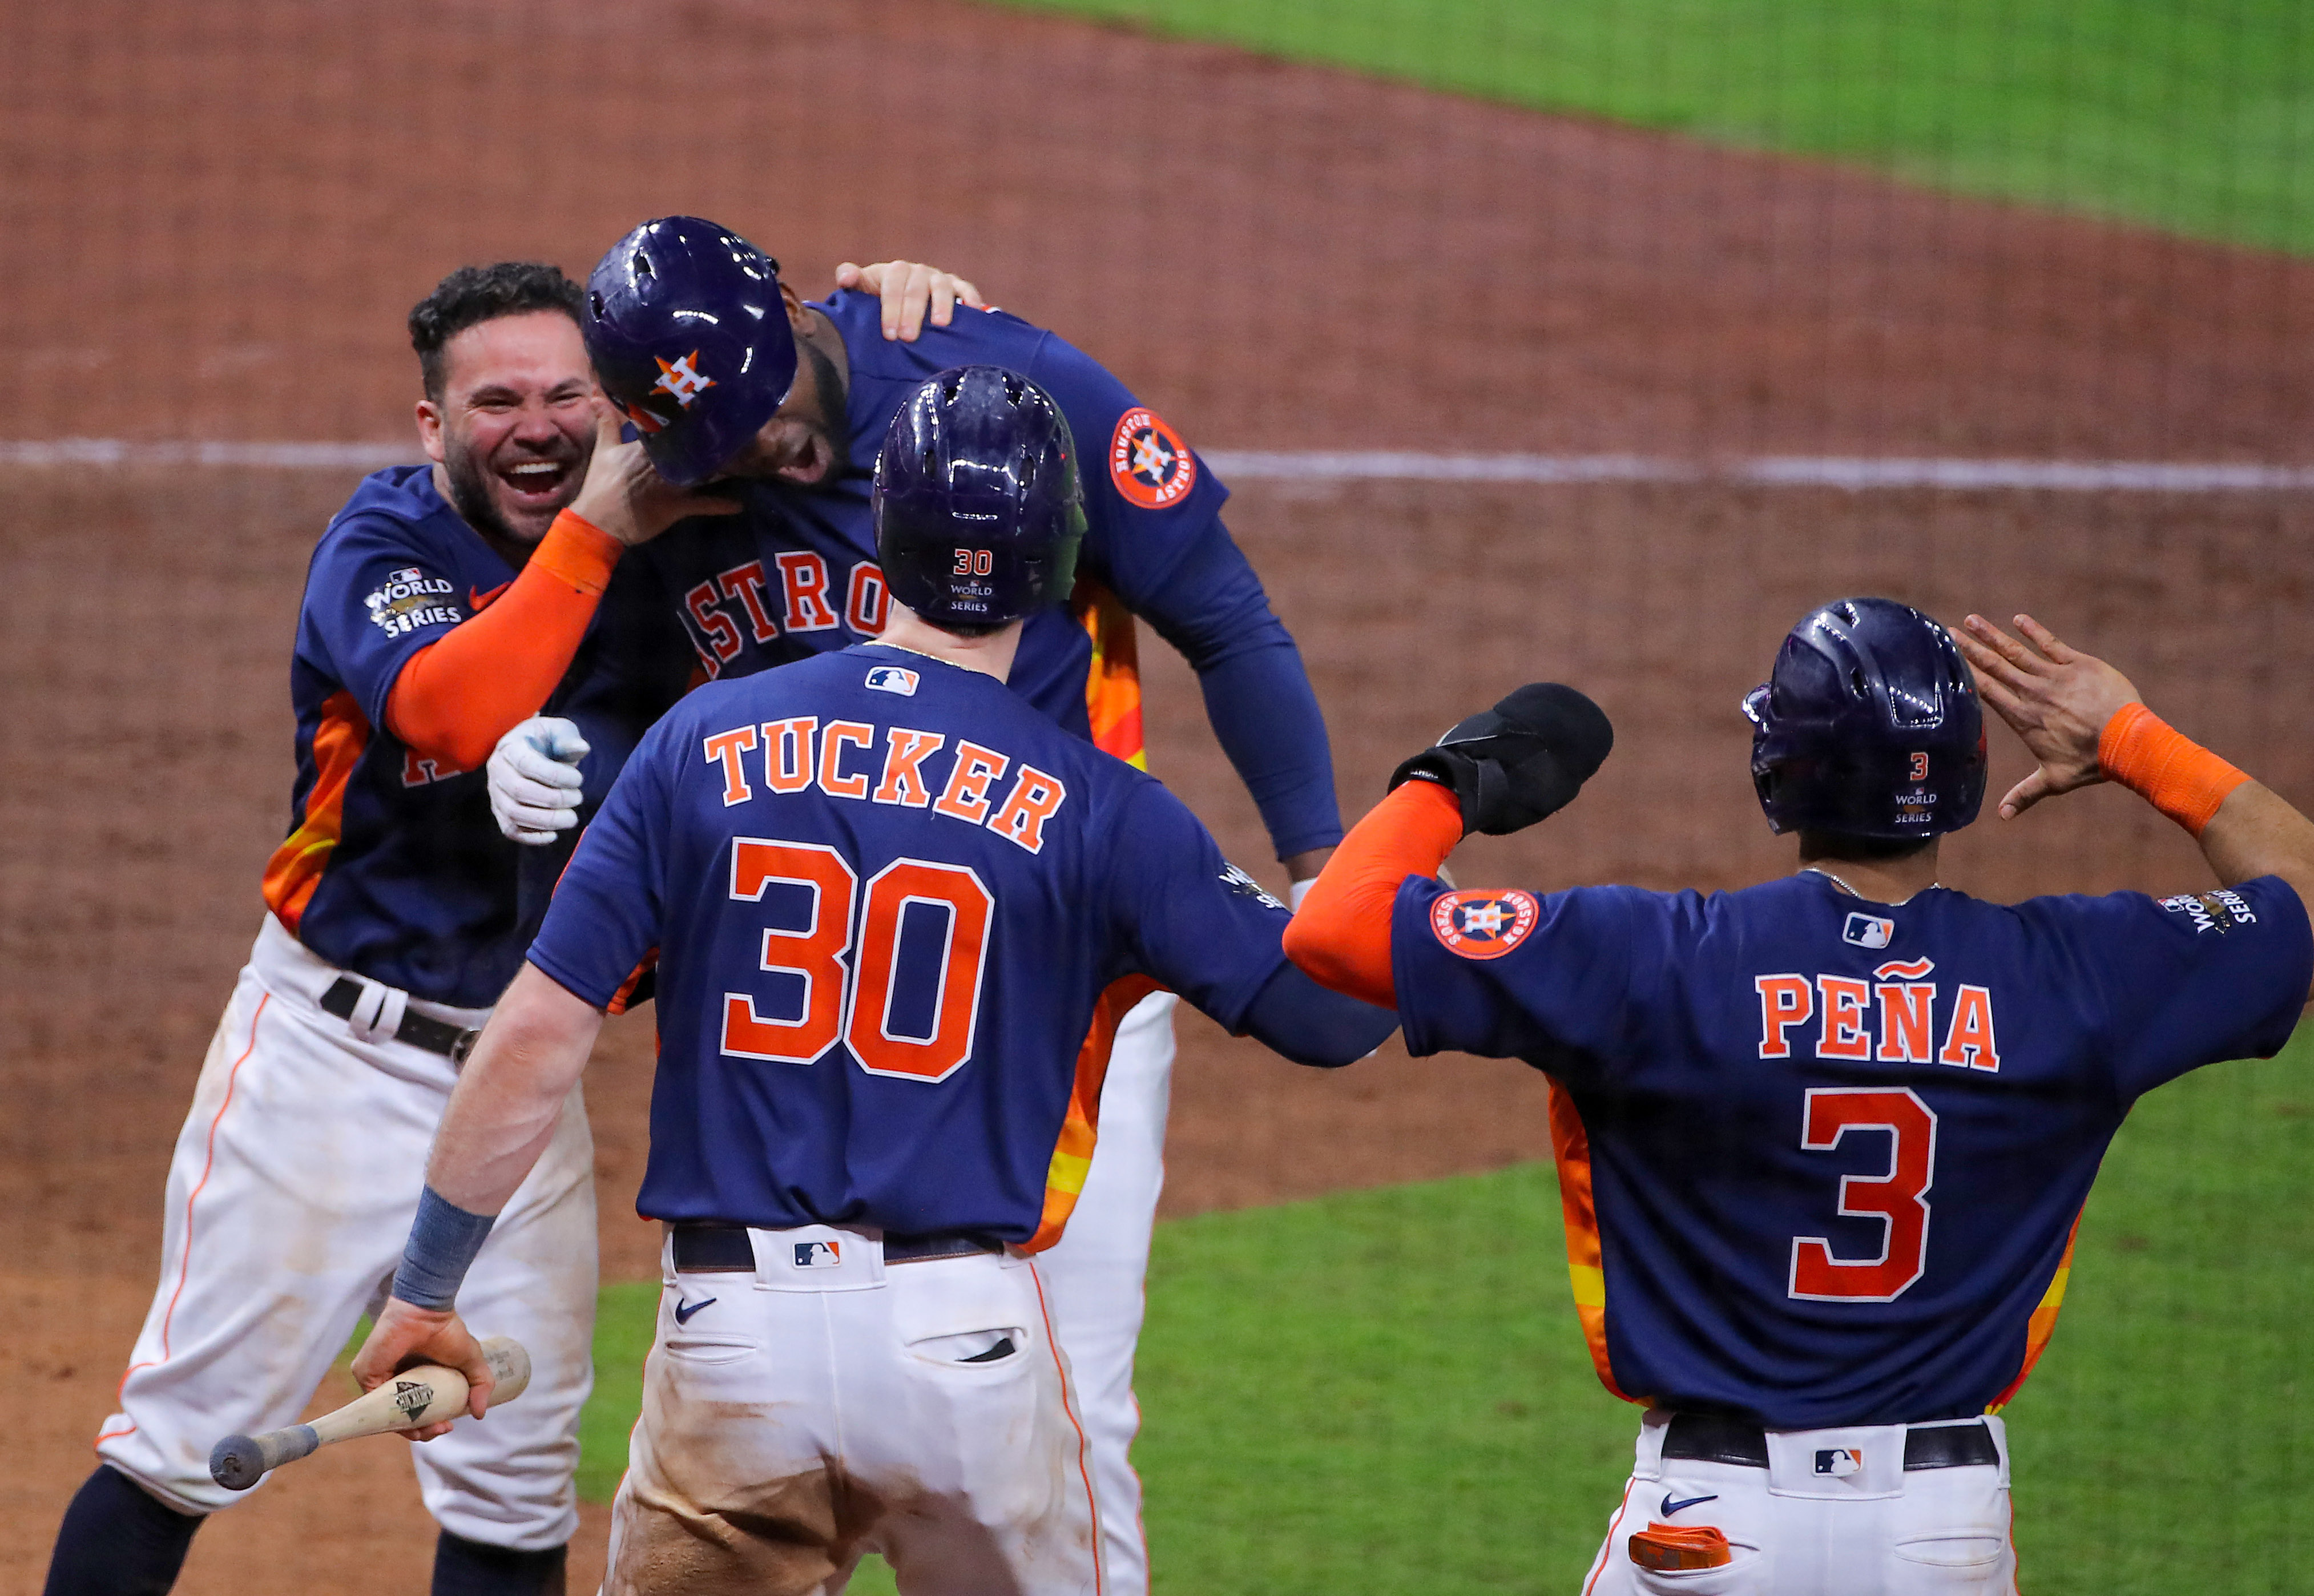 World Series: Houston Astros claim second World Series title in six years  with victory over Philadelphia Phillies, Baseball News